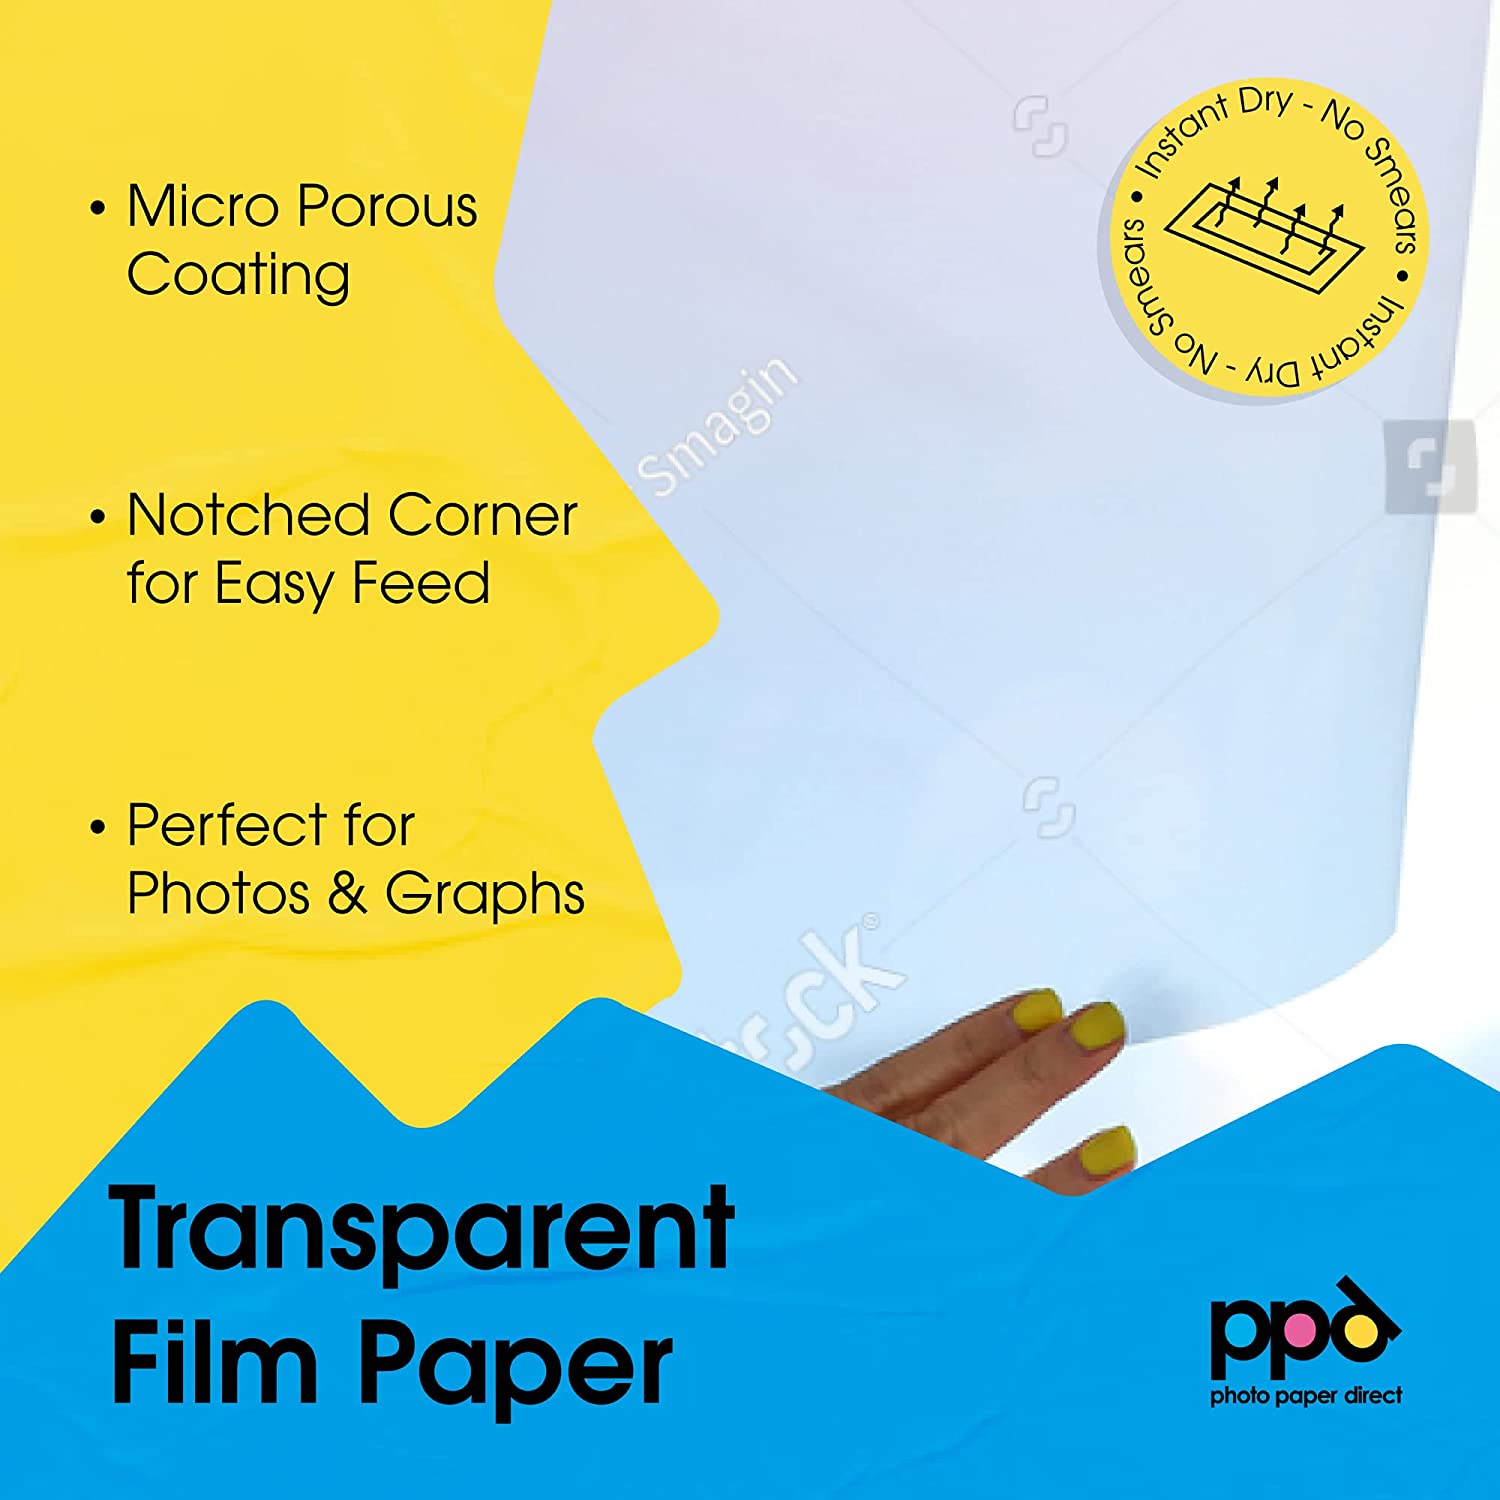 PPD Premium Inkjet Transparency Film (Overhead Projector Film) 150 Micron  Thick 8.5x11 X 50 Sheets - Instant Dry PPD-34-50